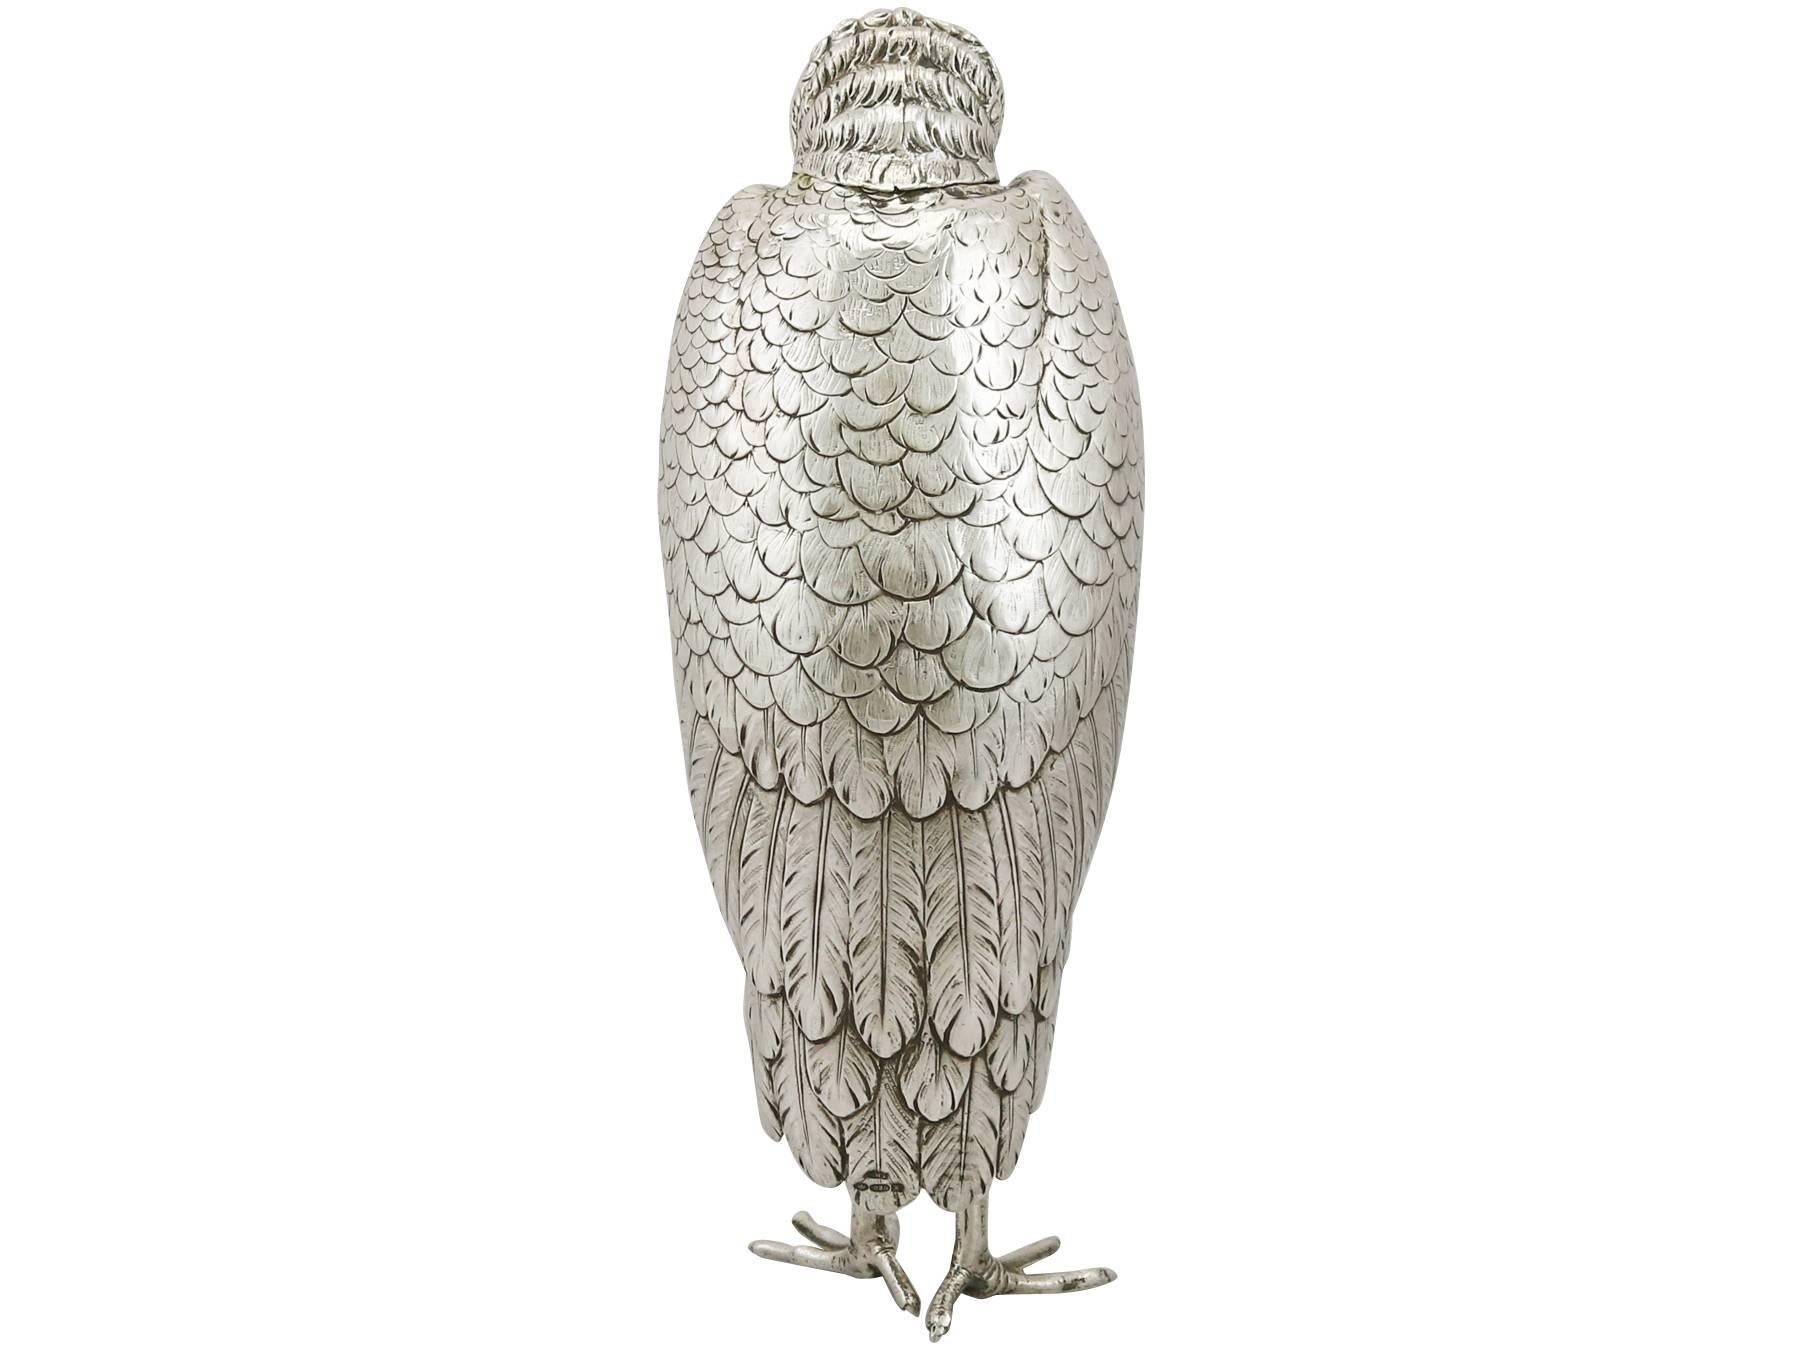 An exceptional, fine and impressive large antique Edwardian English sterling silver sugar box realistically modeled in the form of a striated heron; an addition to our animal related silverware collection

This exceptional antique Edwardian cast